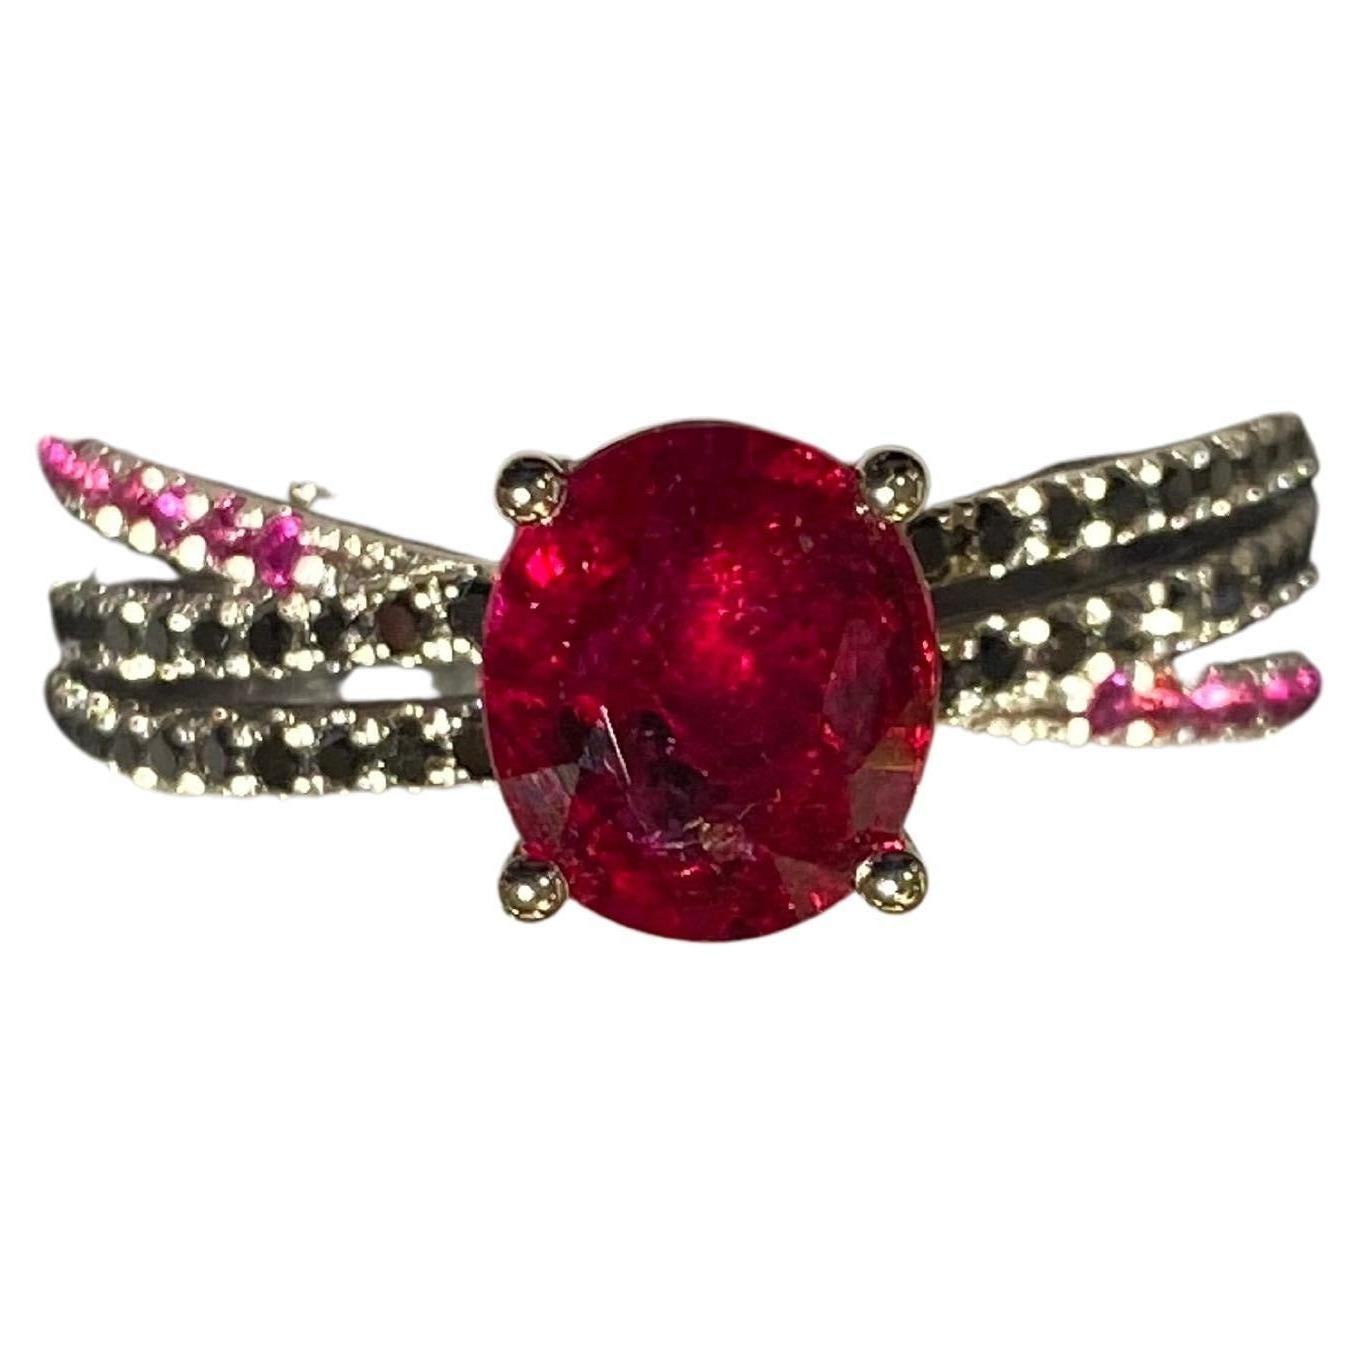 Eostre Ruby and Black Diamond Ring in 18k White Gold